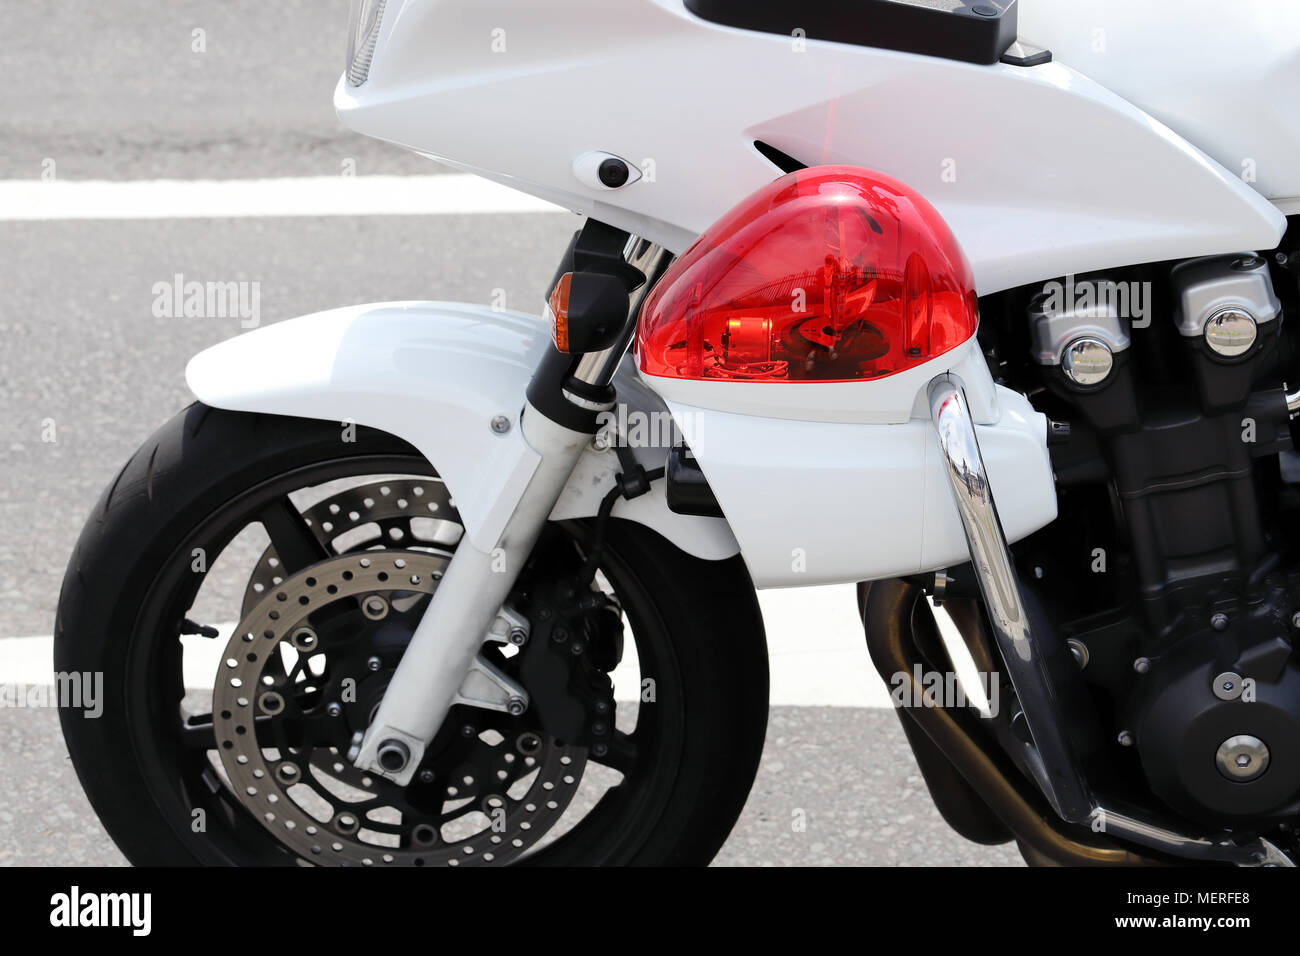 Close up of Japanese police motorcycle Stock Photo